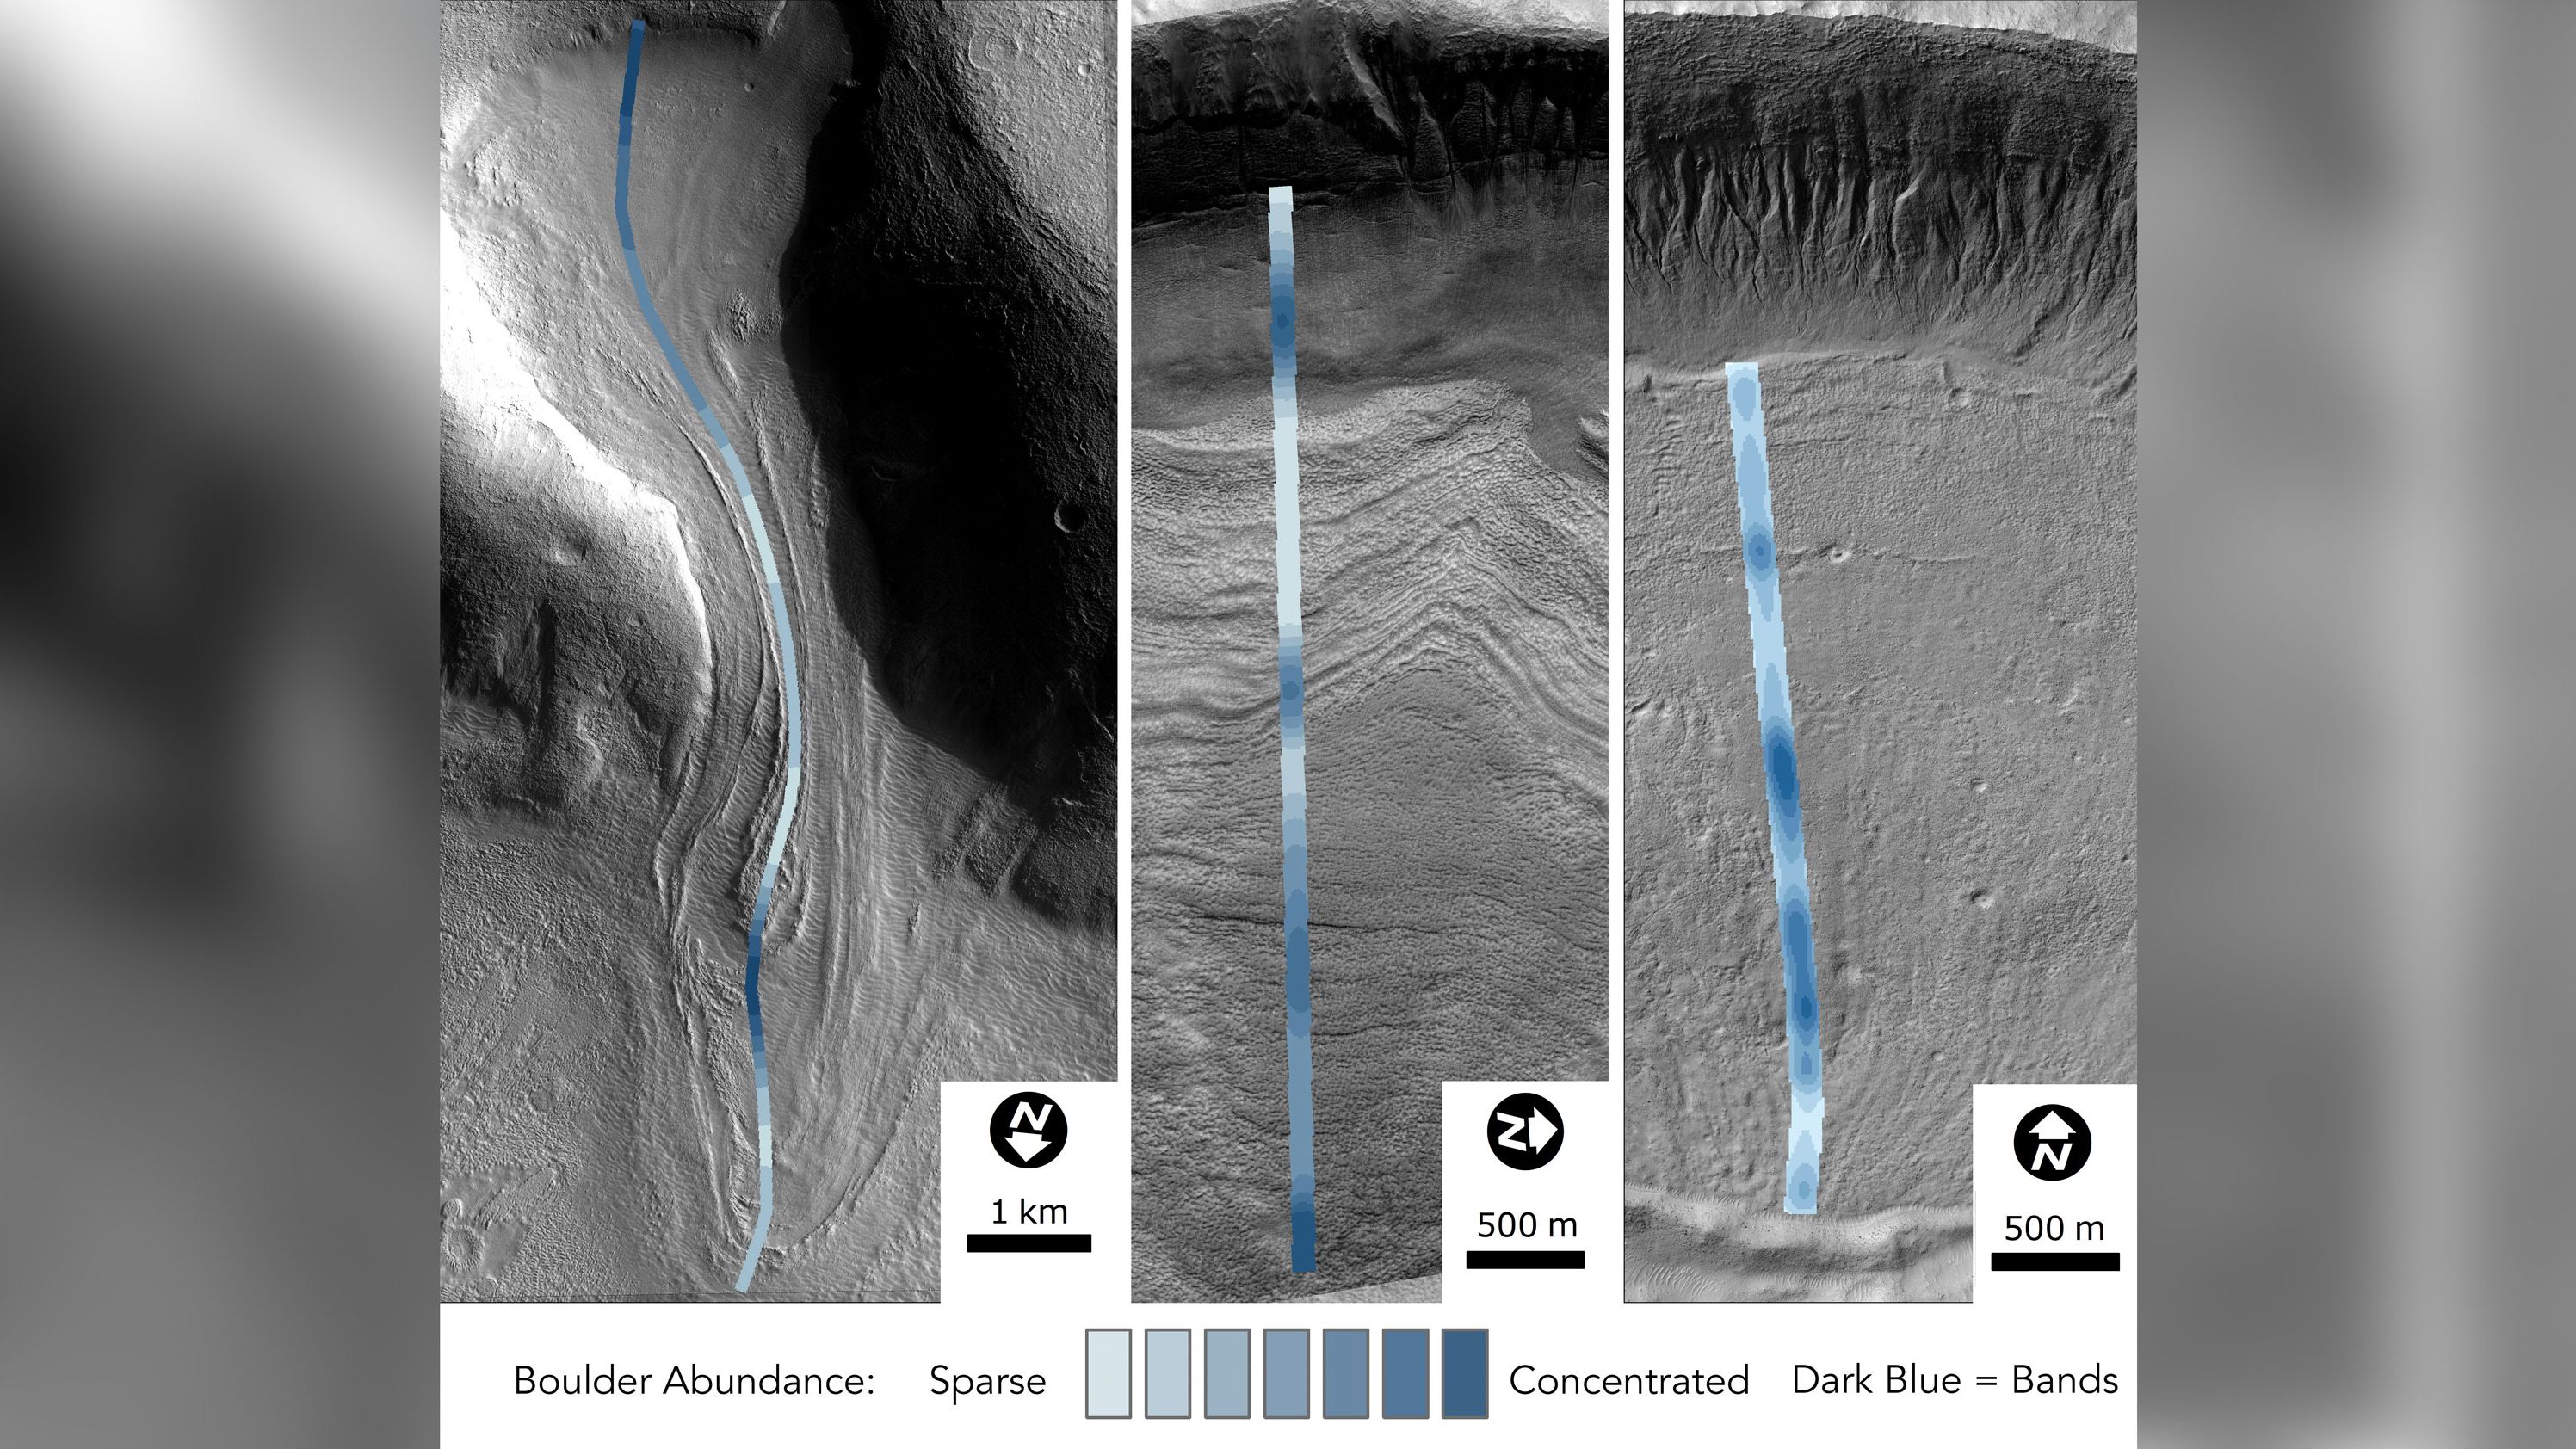 This image shows the abundance of boulders that can be found in glaciers on Mars.